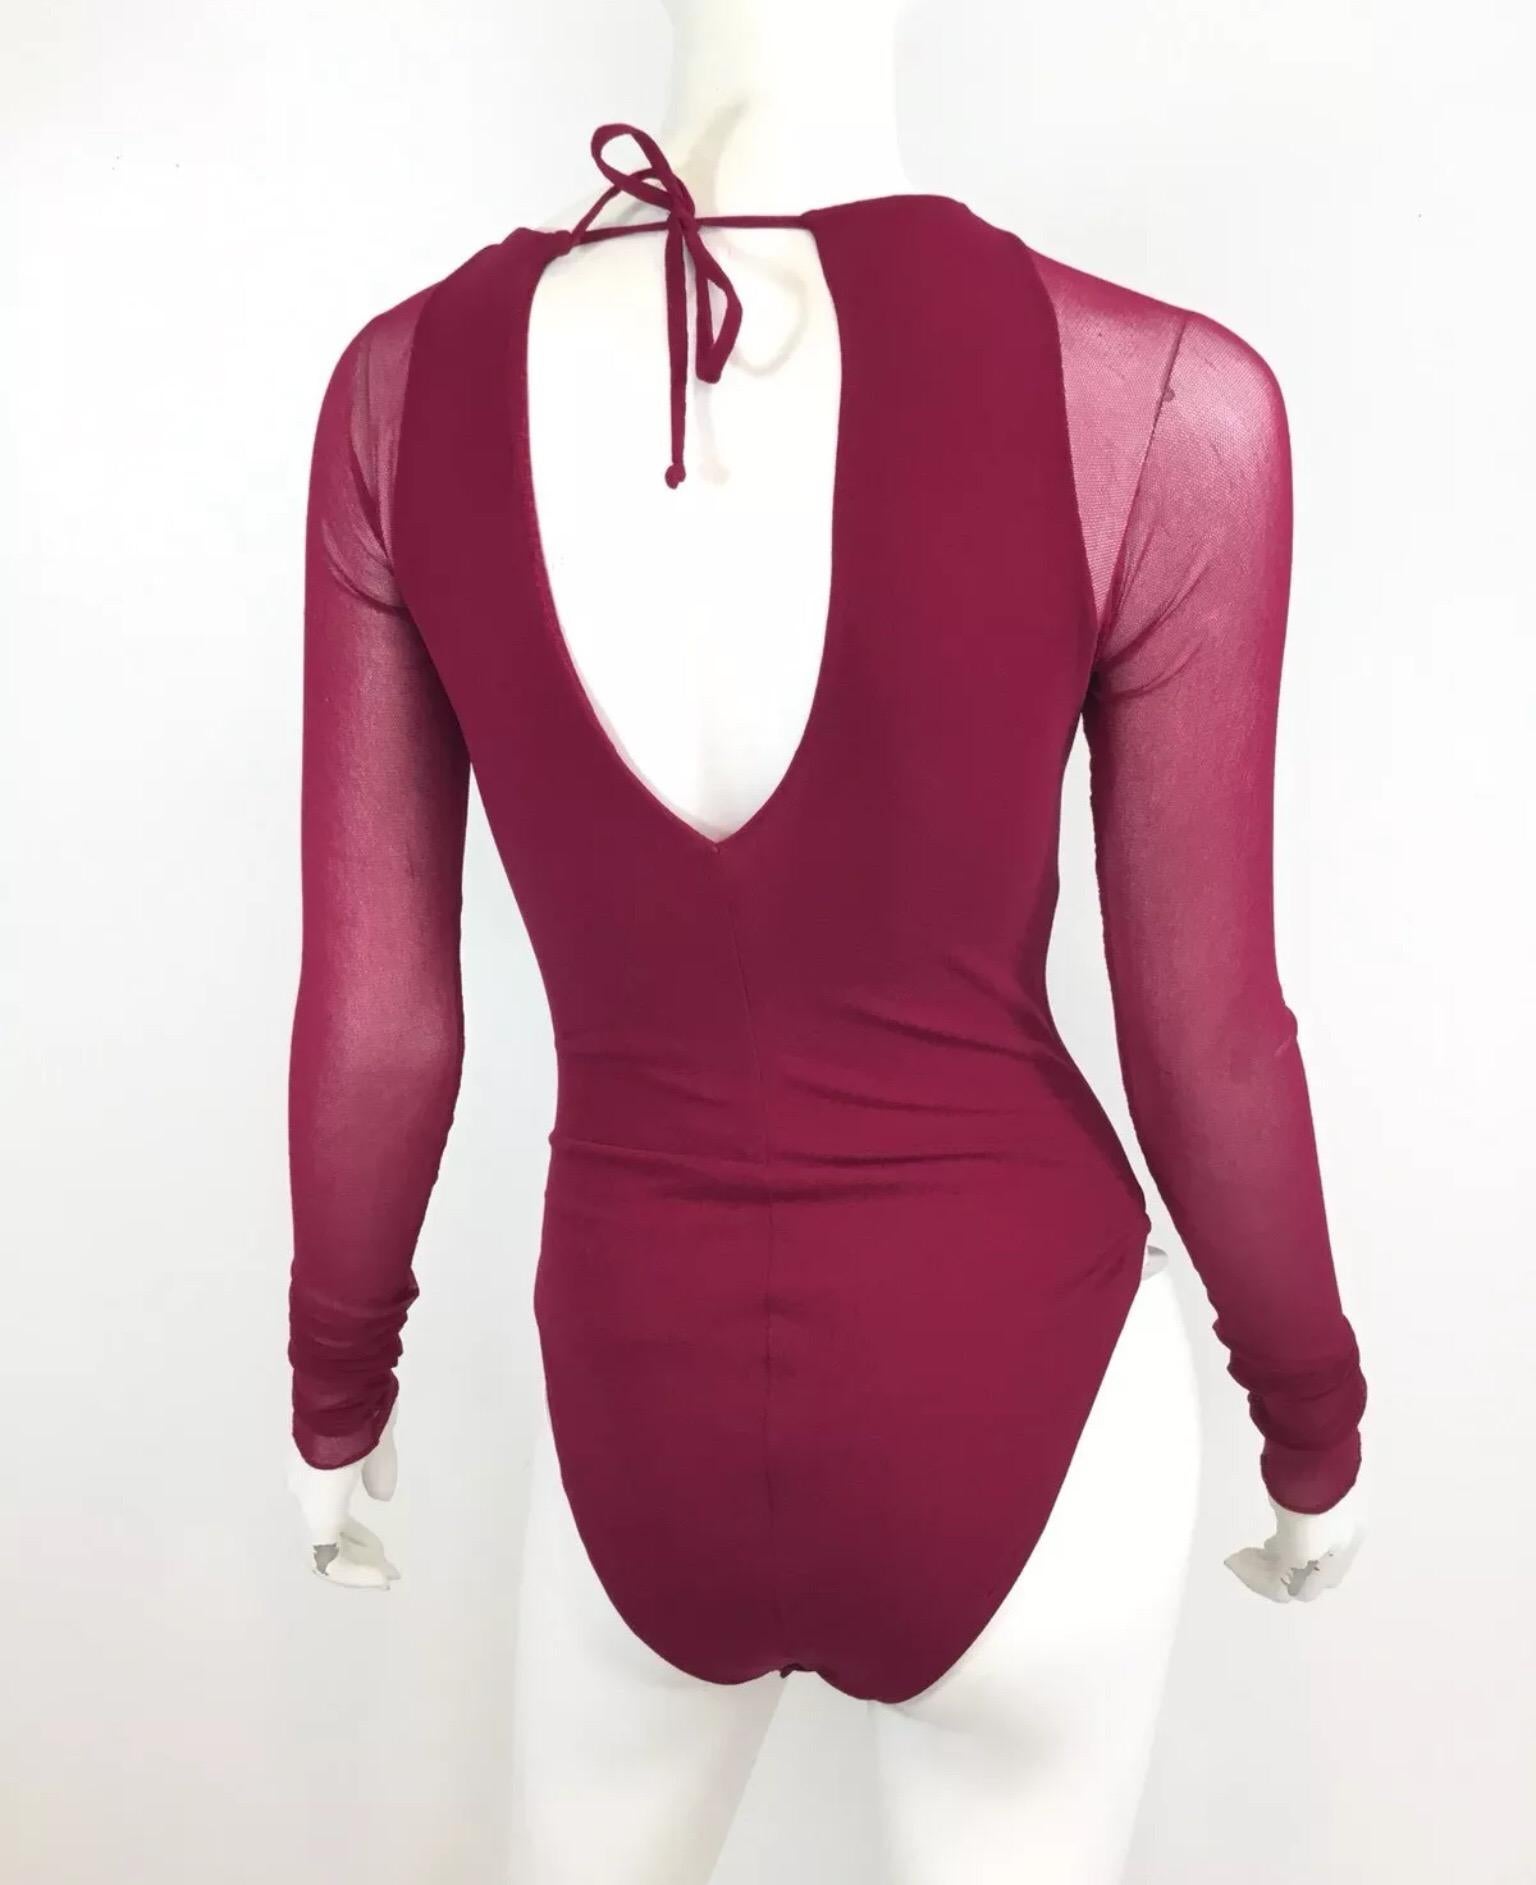 Vintage Giorgio di Sant Angelo sticking knit bodysuit in a raspberry color with a back tie closure and snap fastenings. Bodysuit is in excellent vintage comdition with no major wears.

Bust 28”, sleeves 29”, waist 21” (stretch to the fabric)